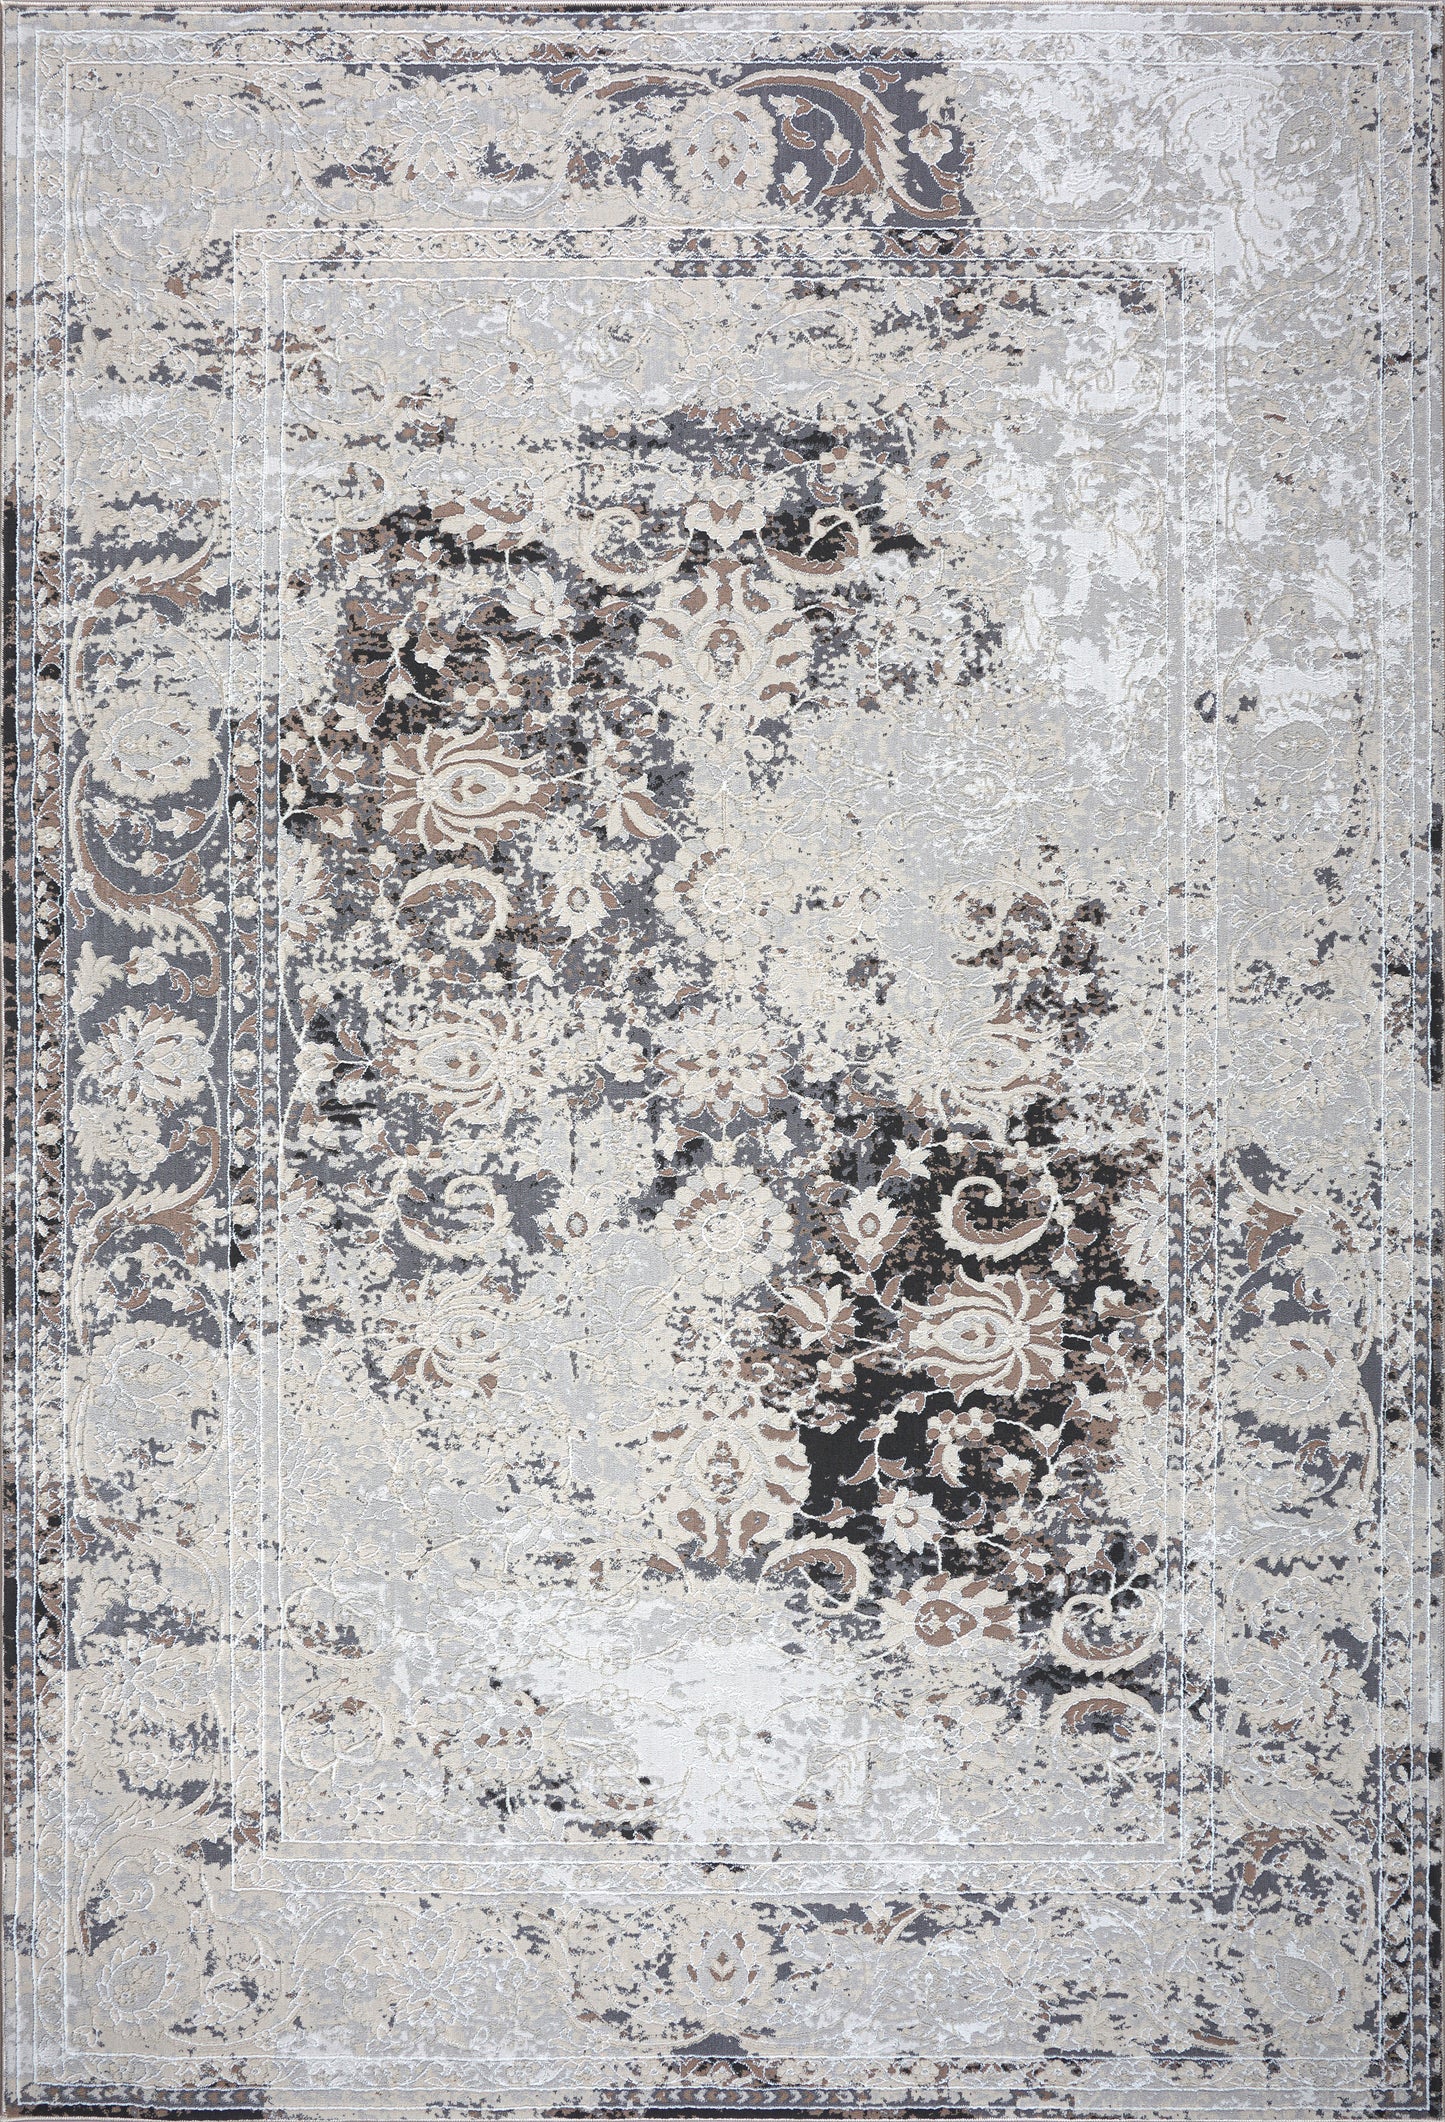 quadro grey ivory brown rustic modern persian area rug 2x5, 3x5 Runner Rug, Entry Way, Entrance, Balcony, Bedside, Home Office, Table Top